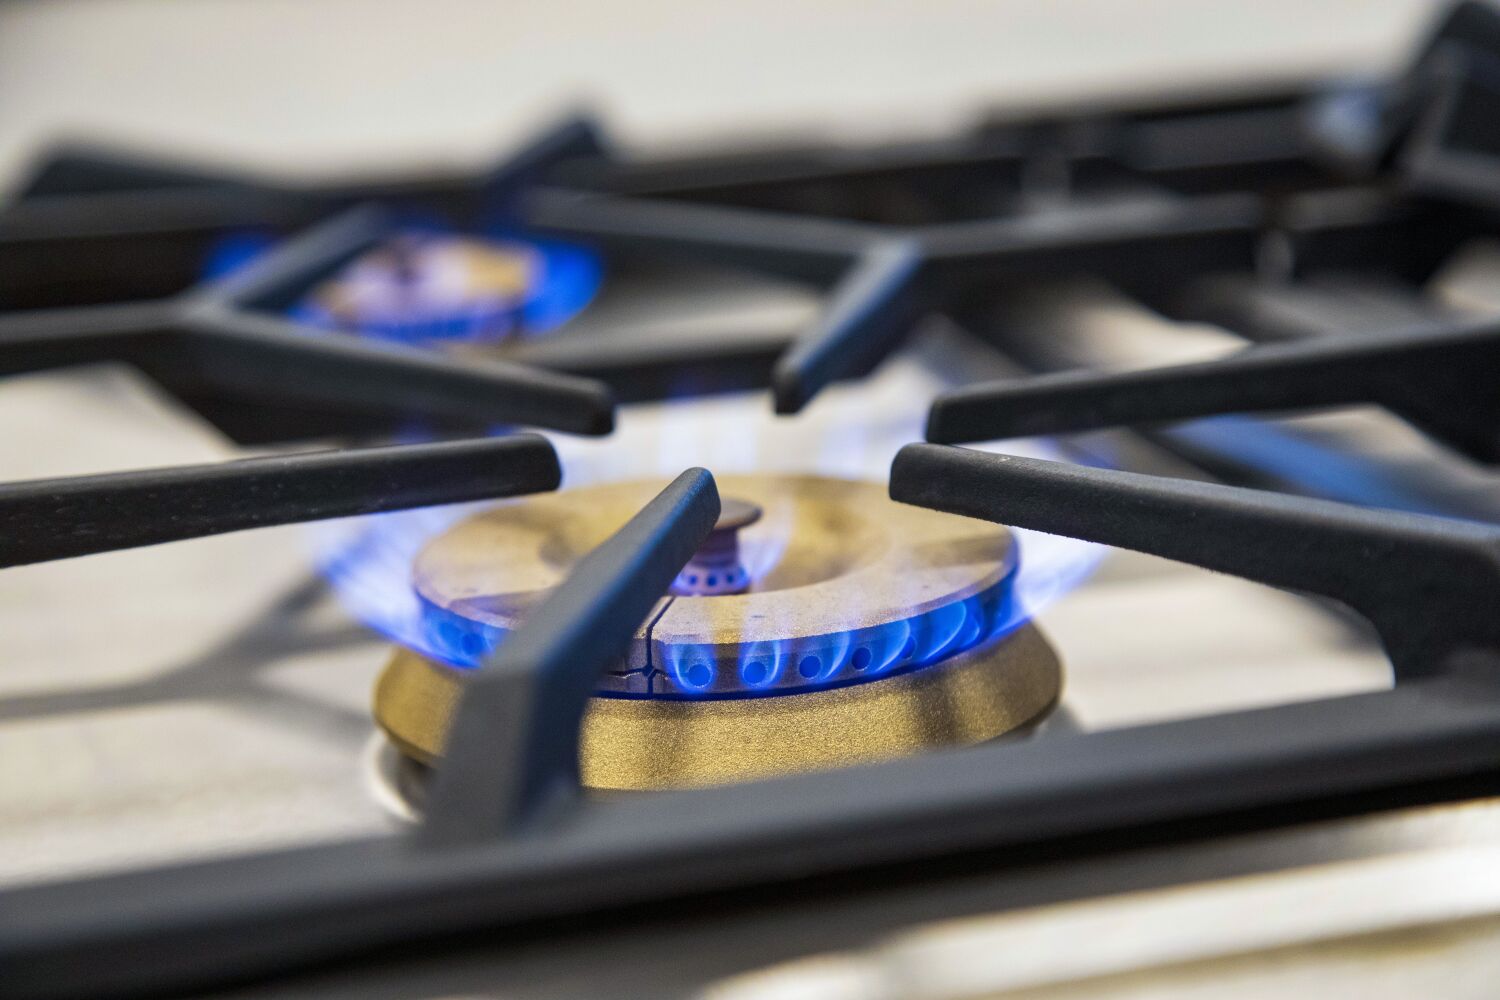 Was your latest natural gas bill more expensive than usual? Share it with us